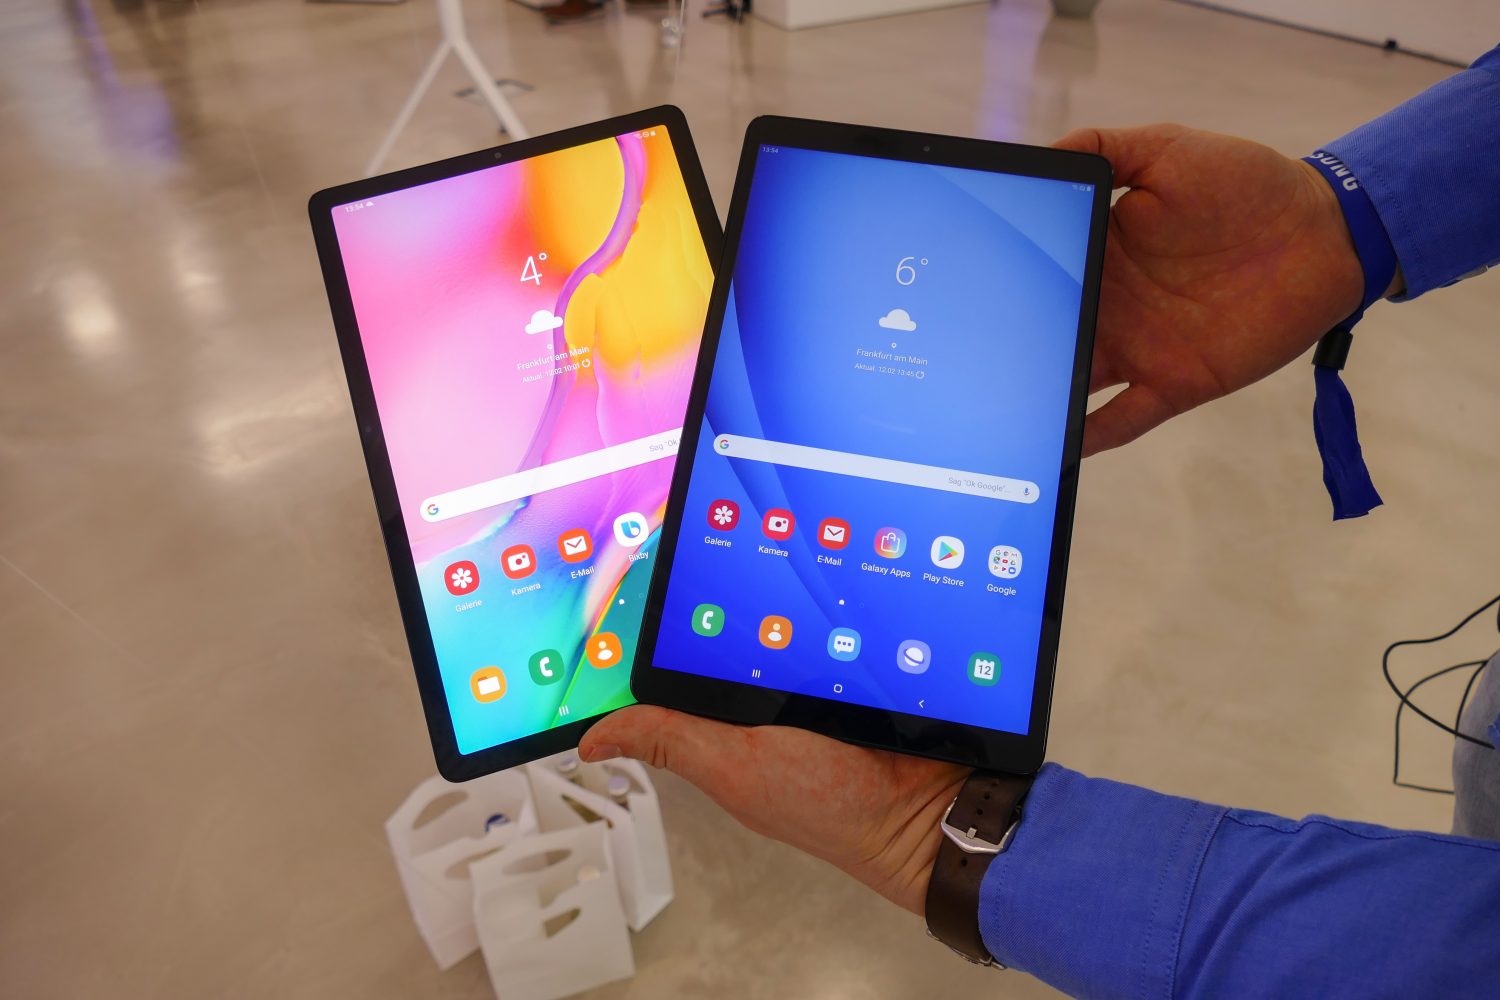 wereld olifant Verward Galaxy Tab A 10.1 (2019) unveiled with metal body, Android Pie (One UI) -  SamMobile